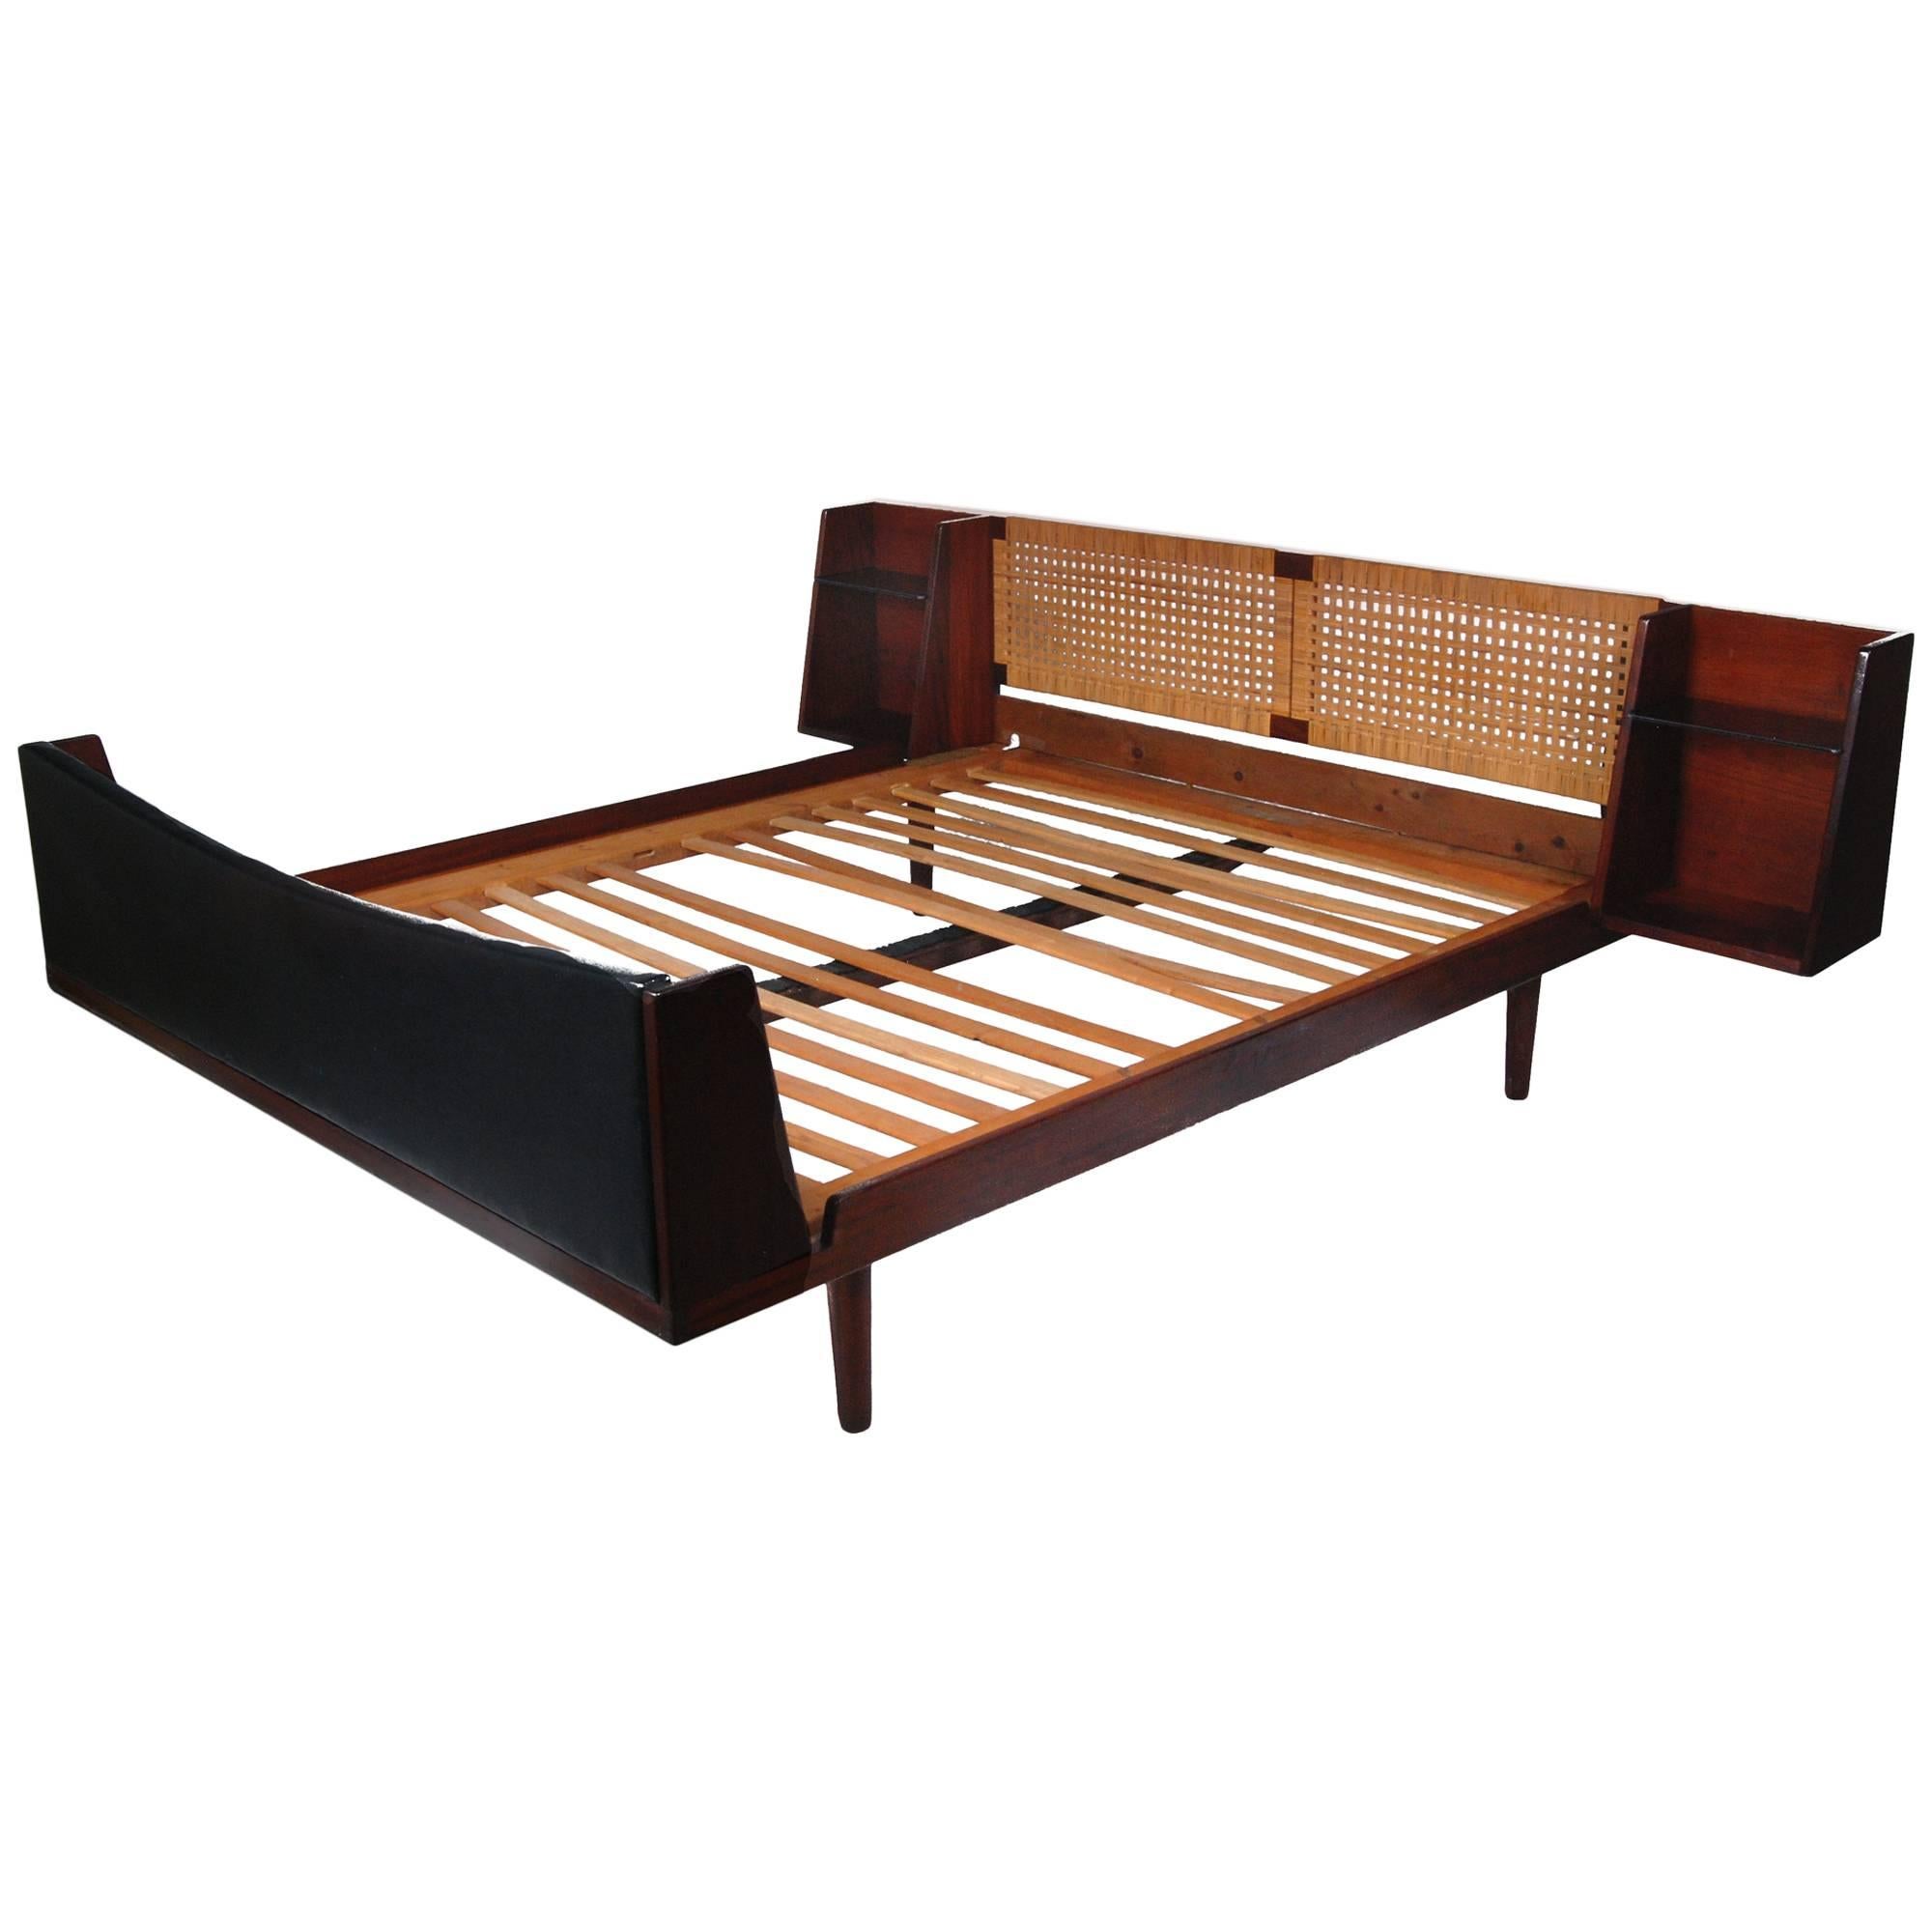 Hans J. Wegner Teak with Cane Queen Bed with Night Tables for GETAMA, 1960s